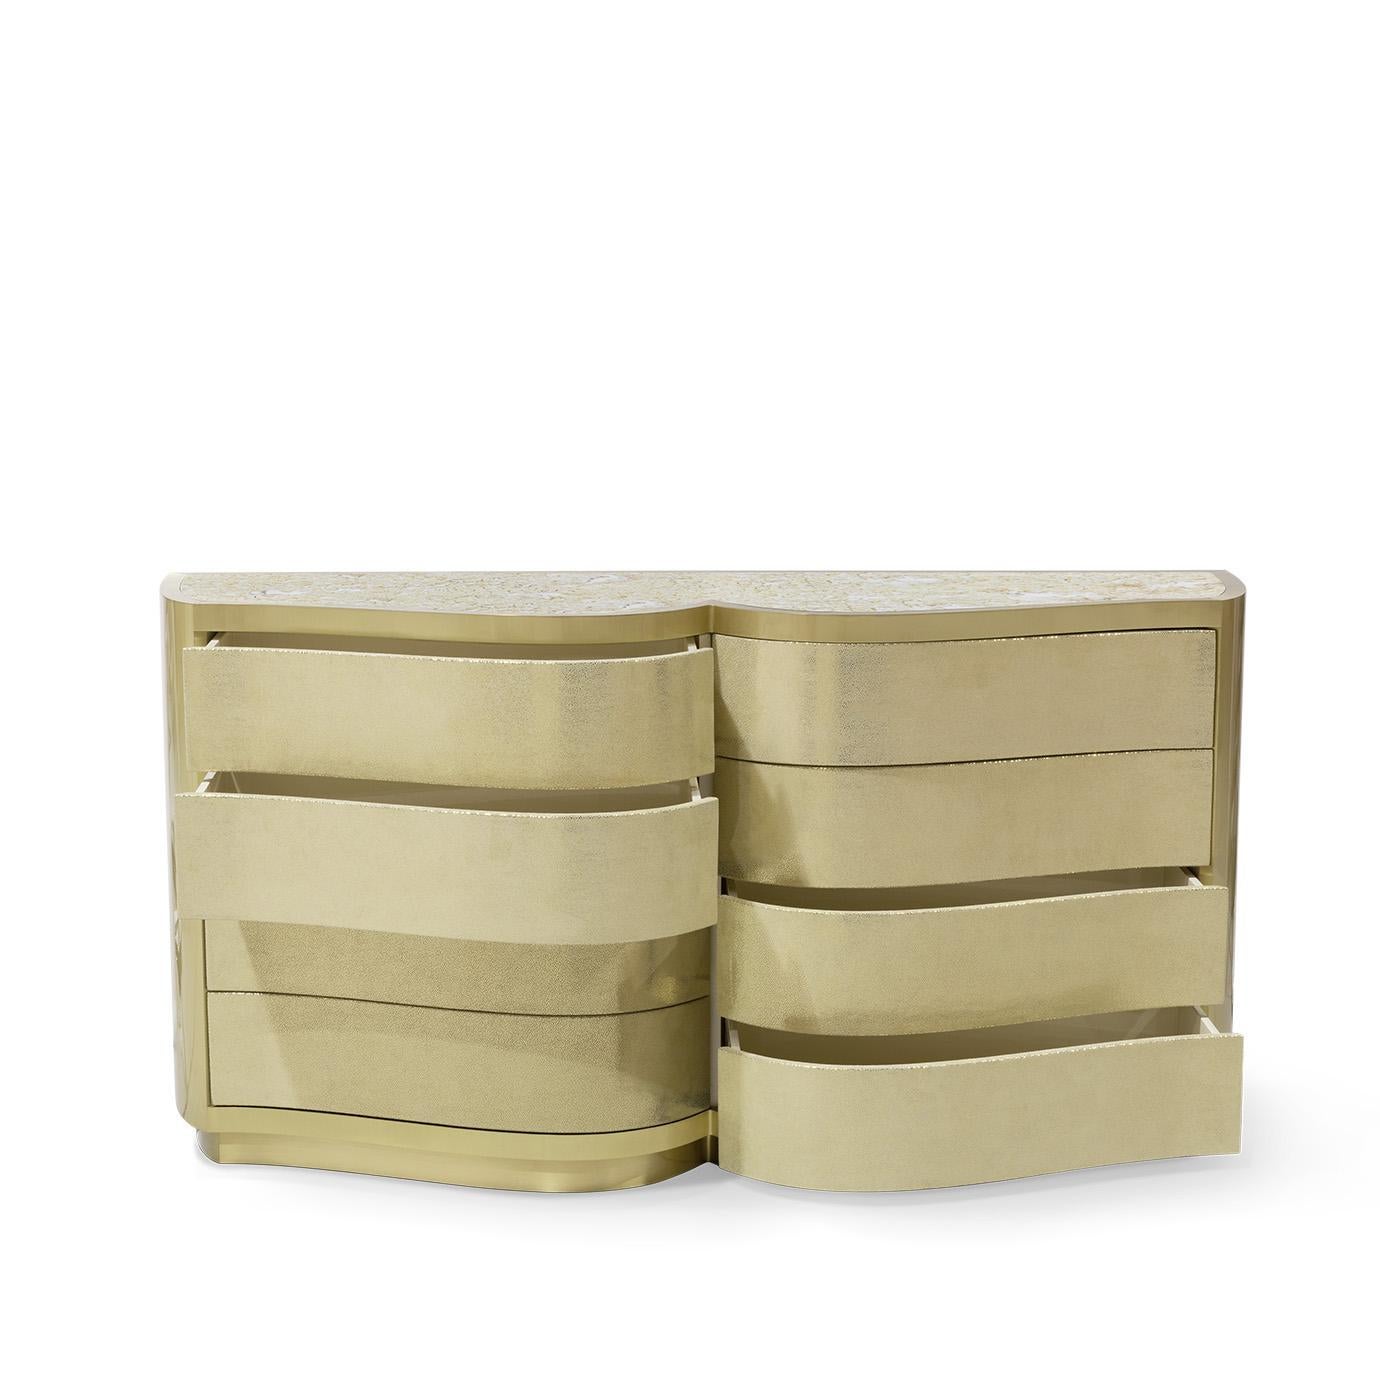 The delicate undulating front of the Poem Chest and its leather upholstered body framed by metal bands exudes modern vintage glamour. The top of this stunning chest is finished with a sheet of aged mirror.